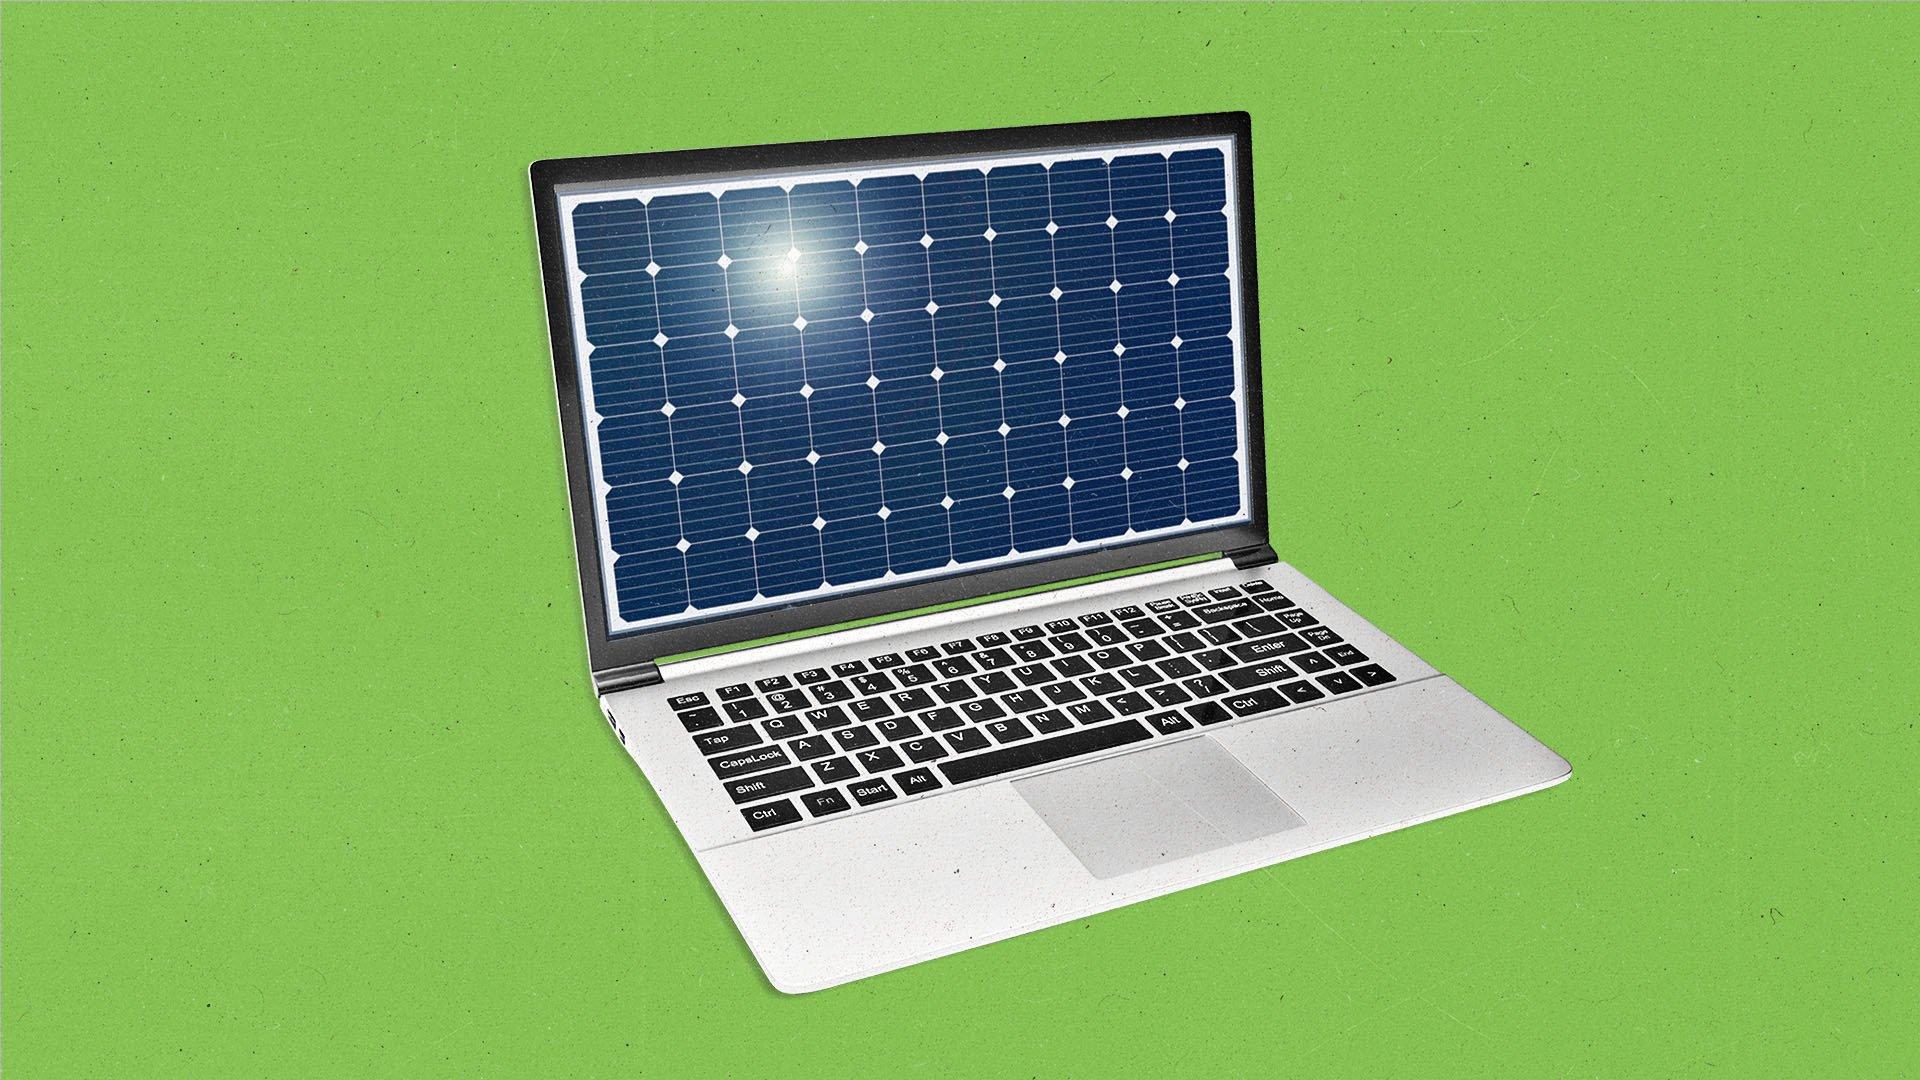 An open laptop with a solar panel instead of a screen reflects a bright sun above.